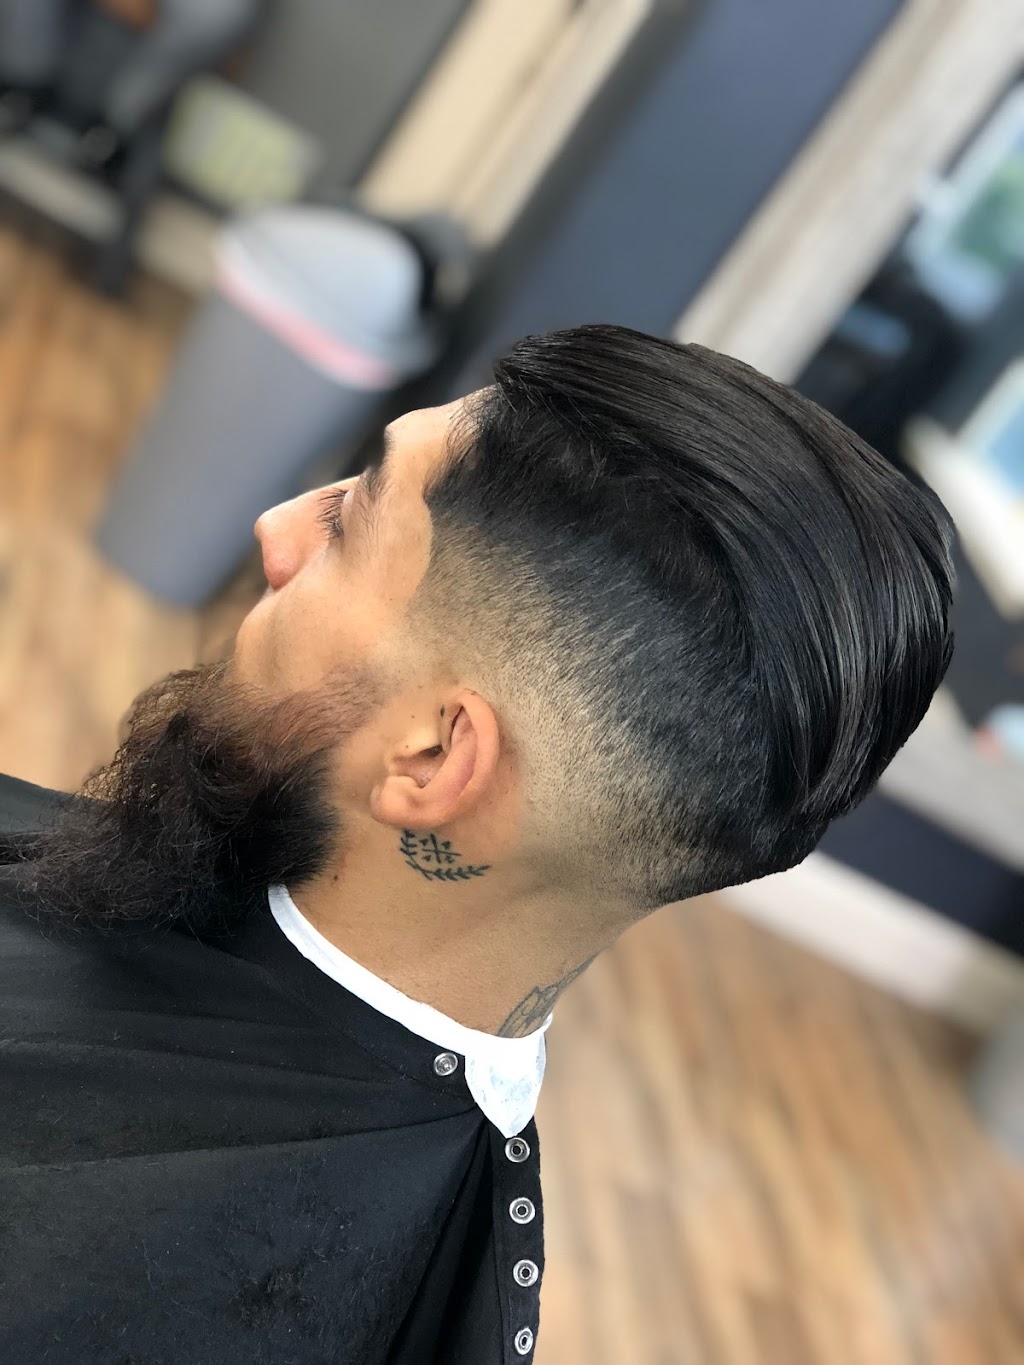 Eric the Barber | 1854 Countryside Dr, Turlock, CA 95380 | Phone: (209) 252-1636